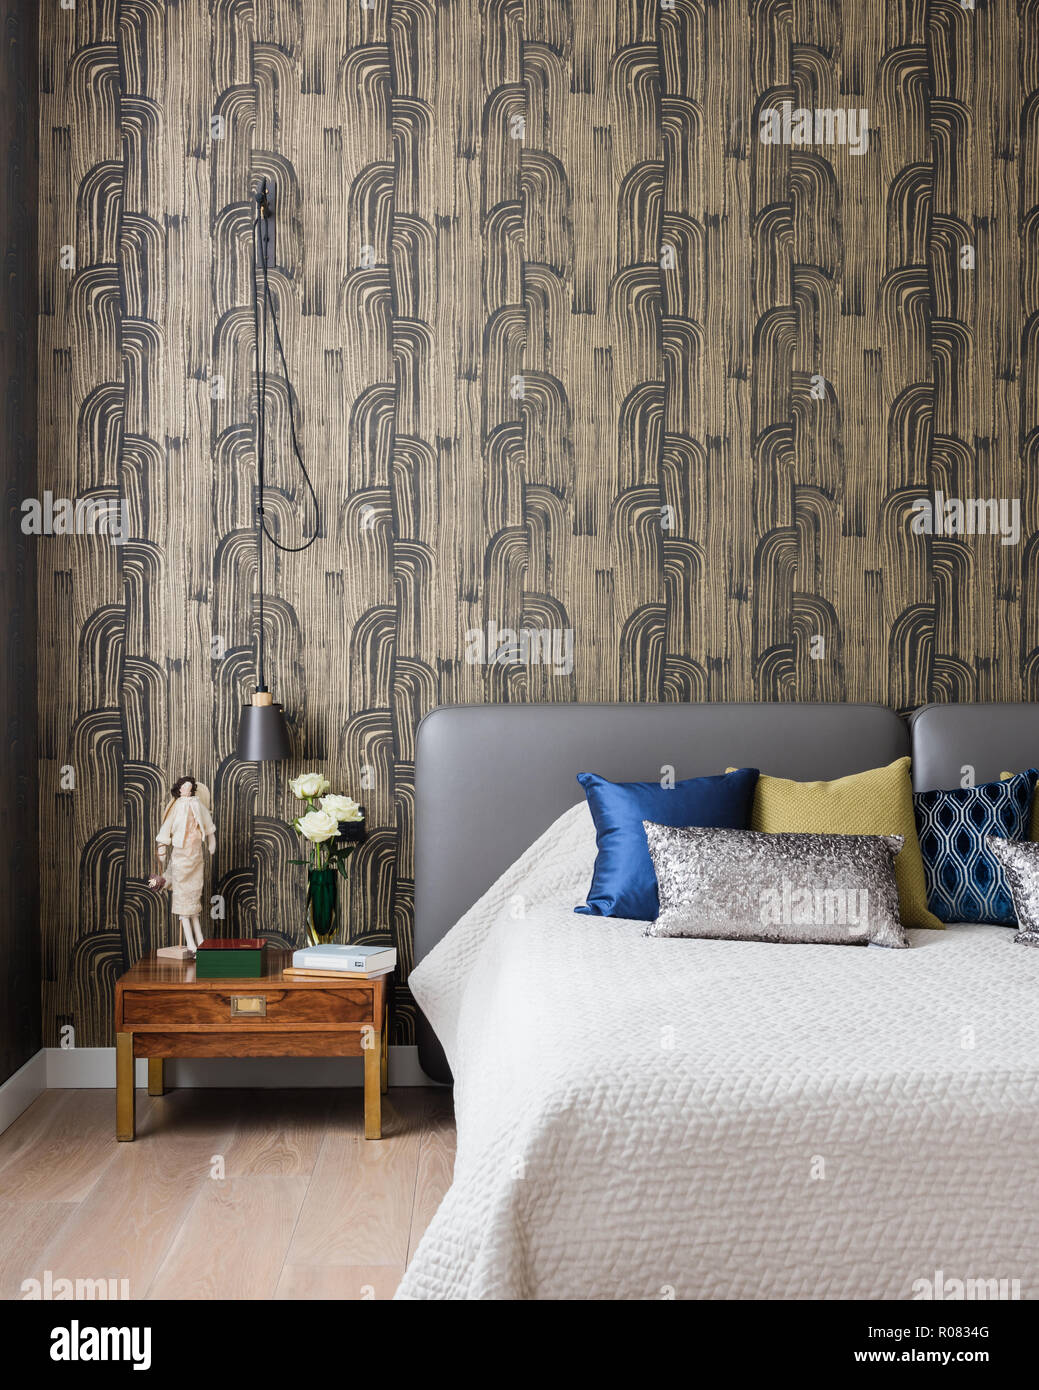 Modern Bedroom With Patterned Wallpaper Stock Photo